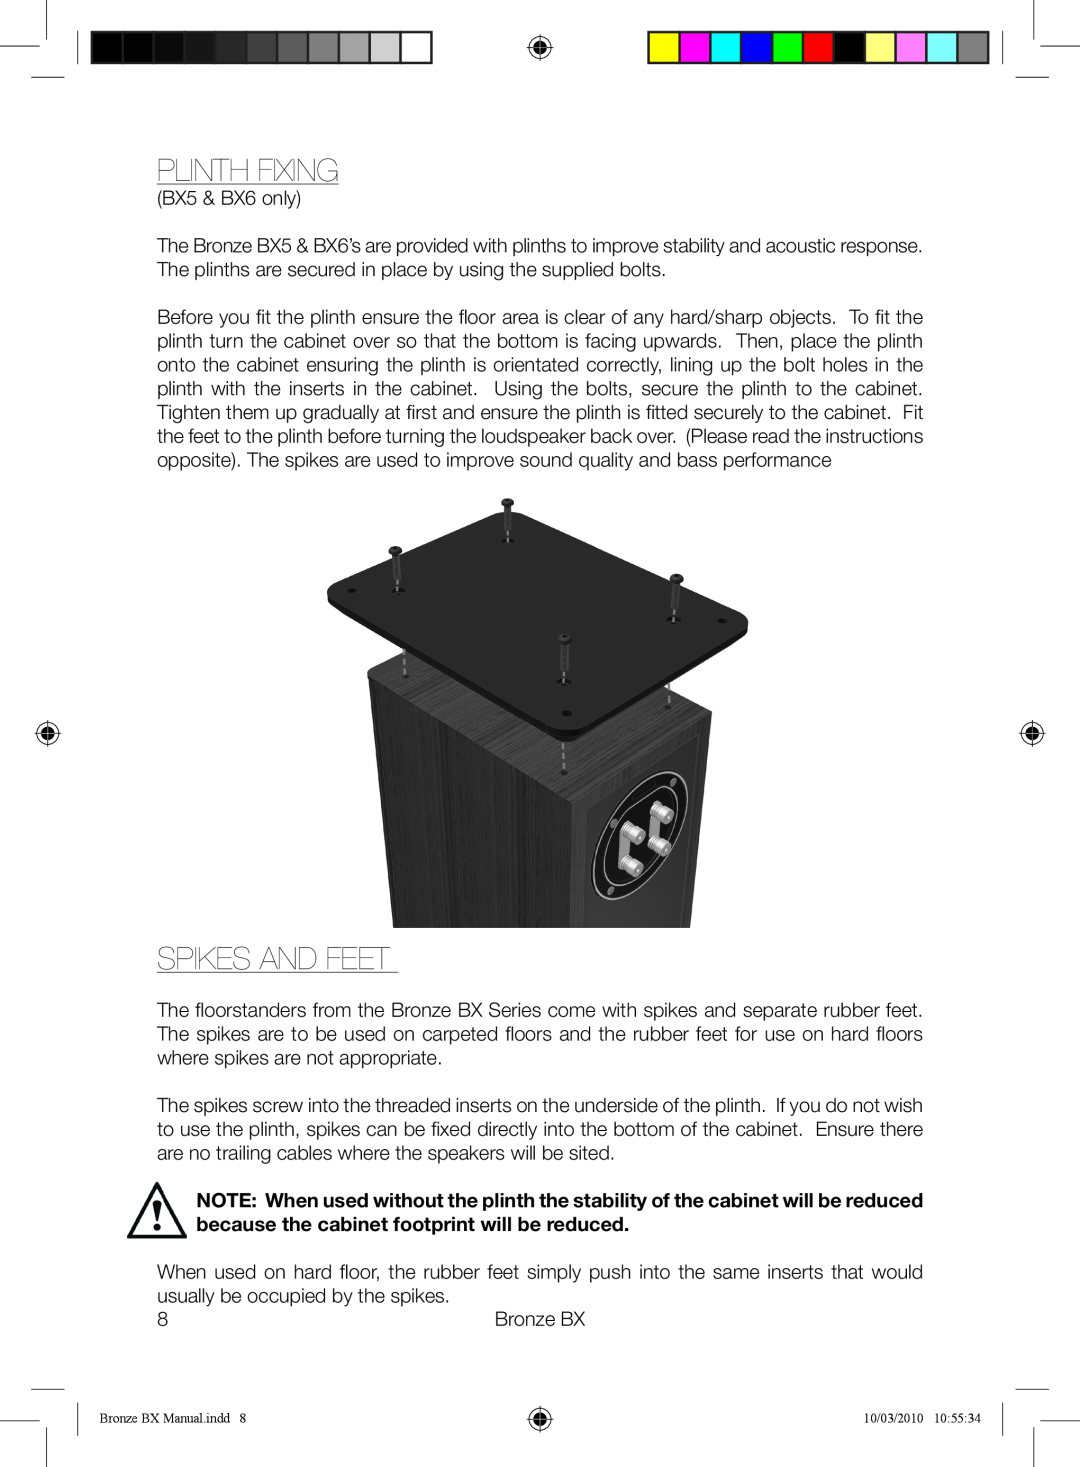 Monitor Audio BX Series owner manual Plinth Fixing, Spikes and feet 